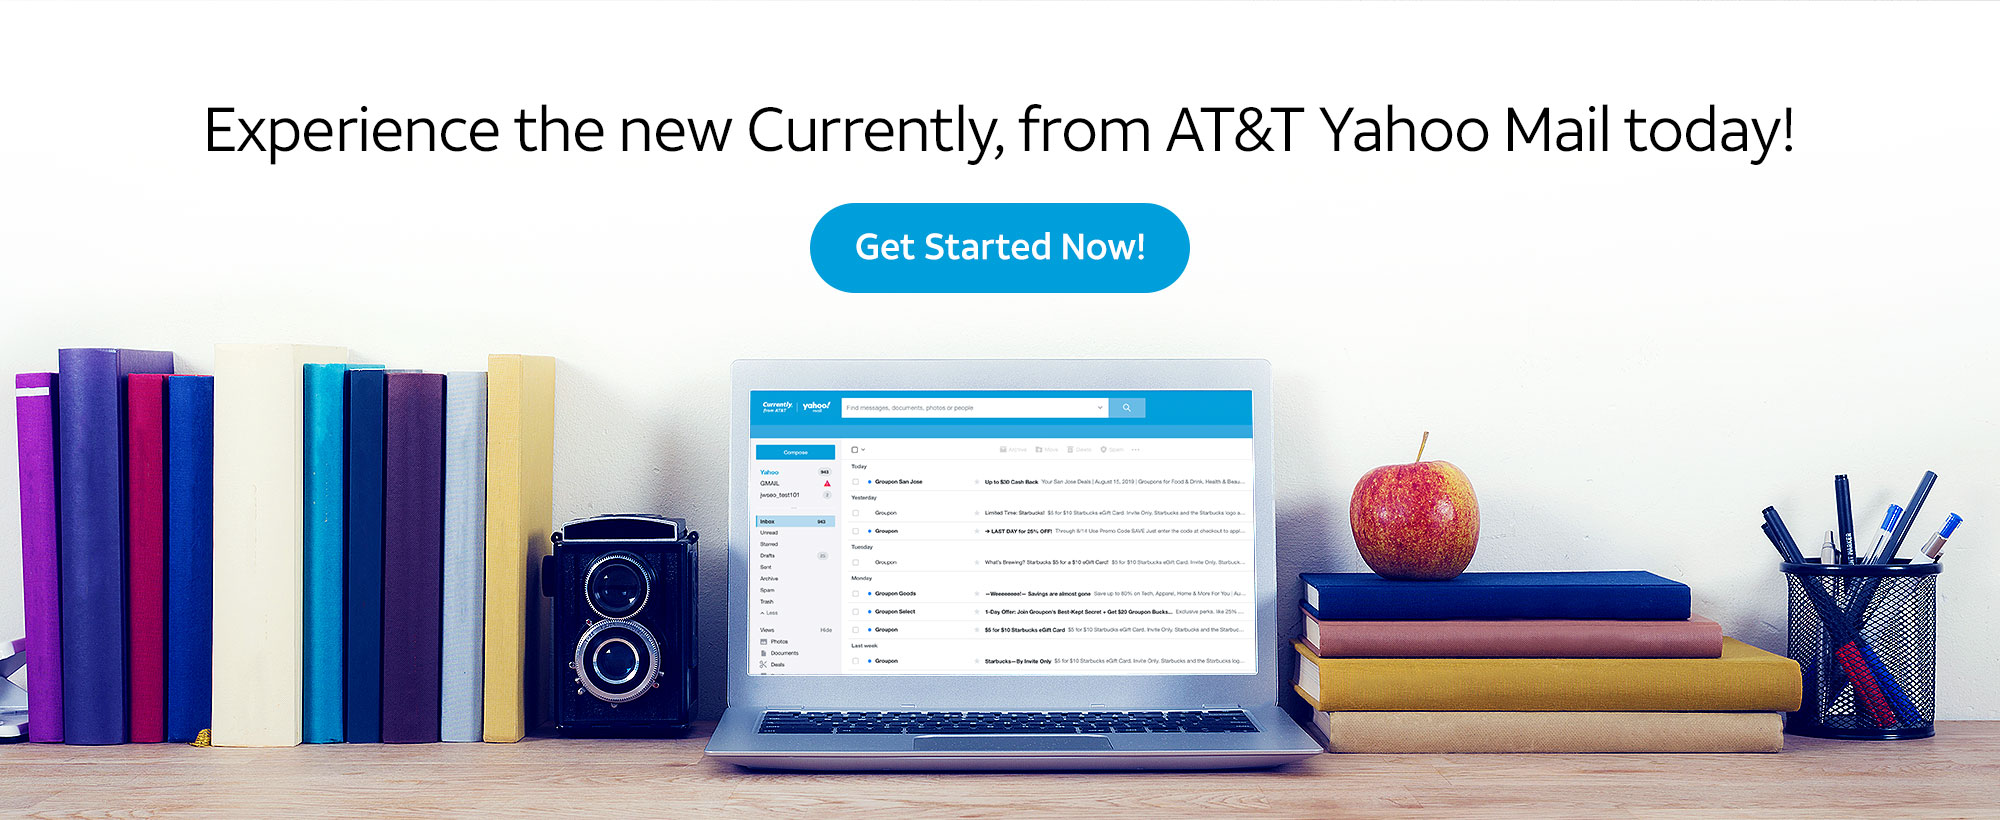 AT&T Mail with att.net and Currently 